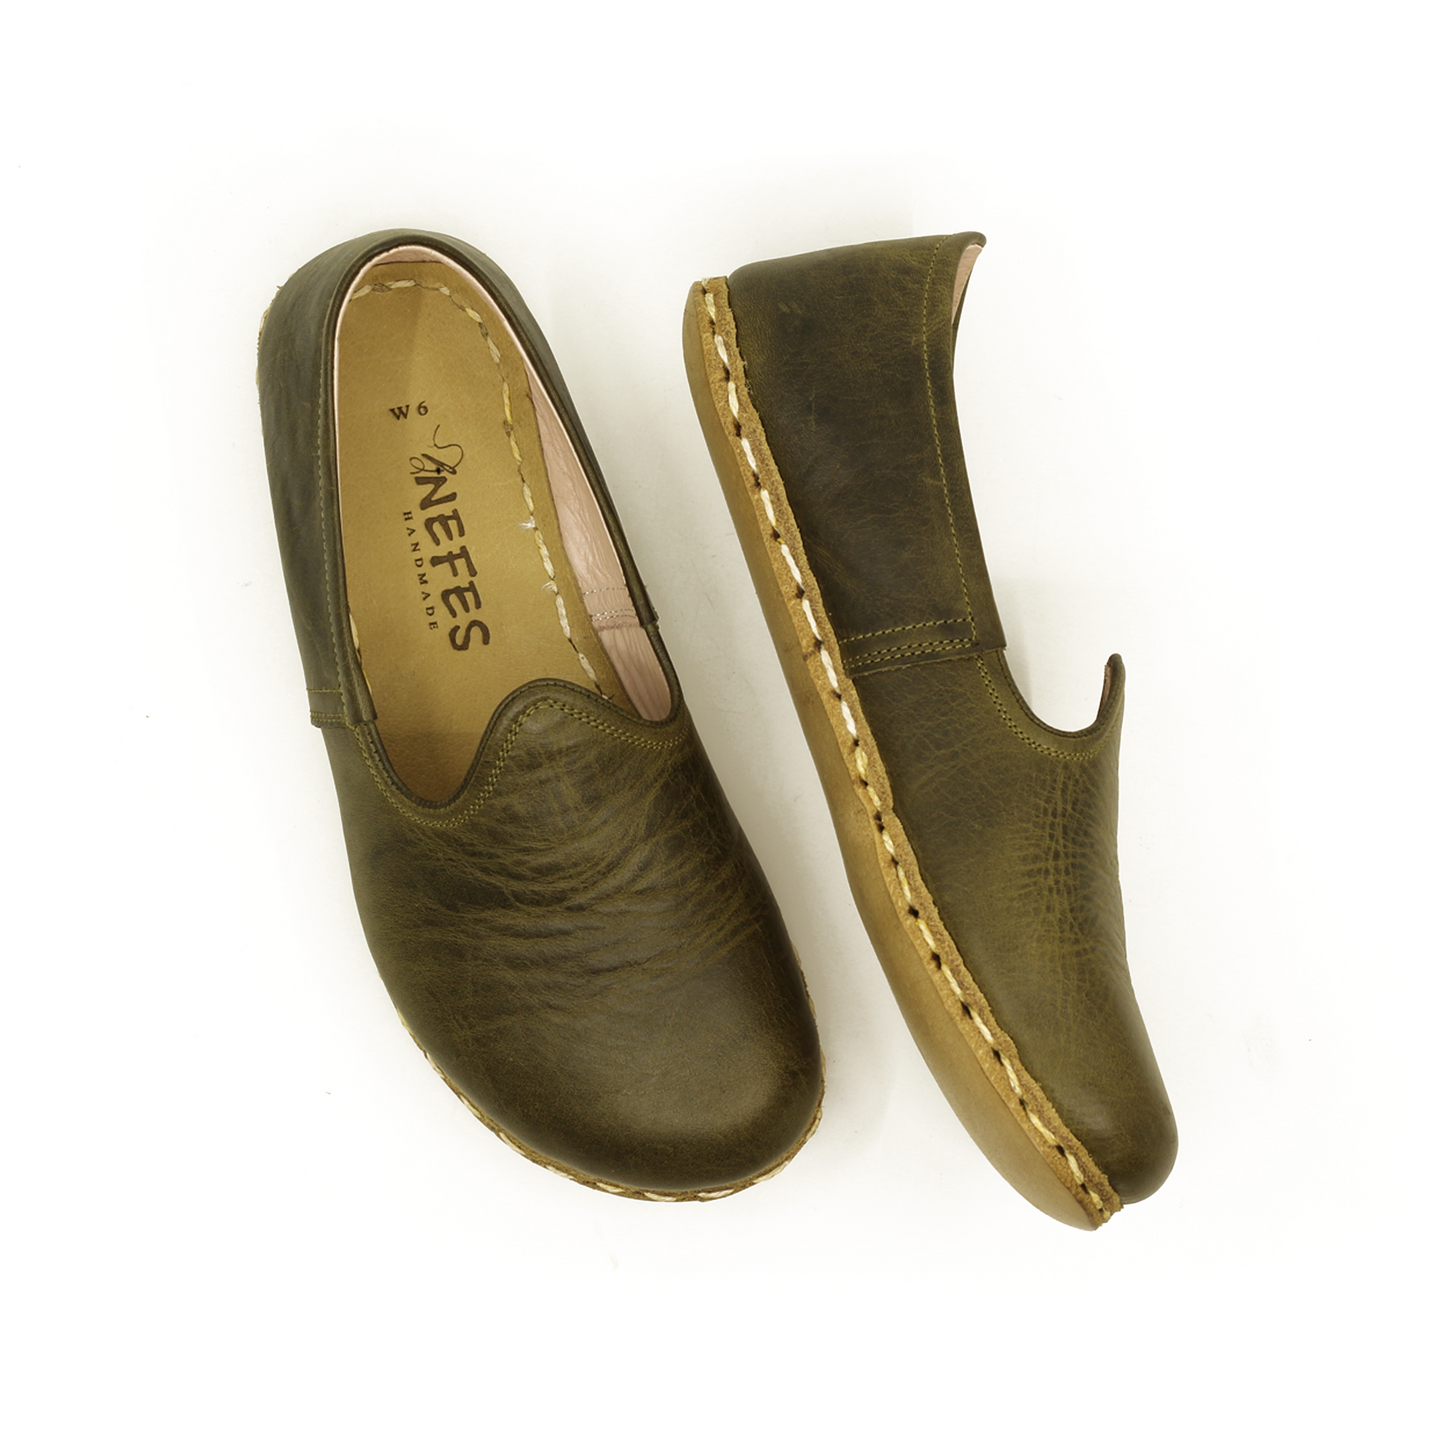 Barefoot Military Green Leather Shoes: Handmade